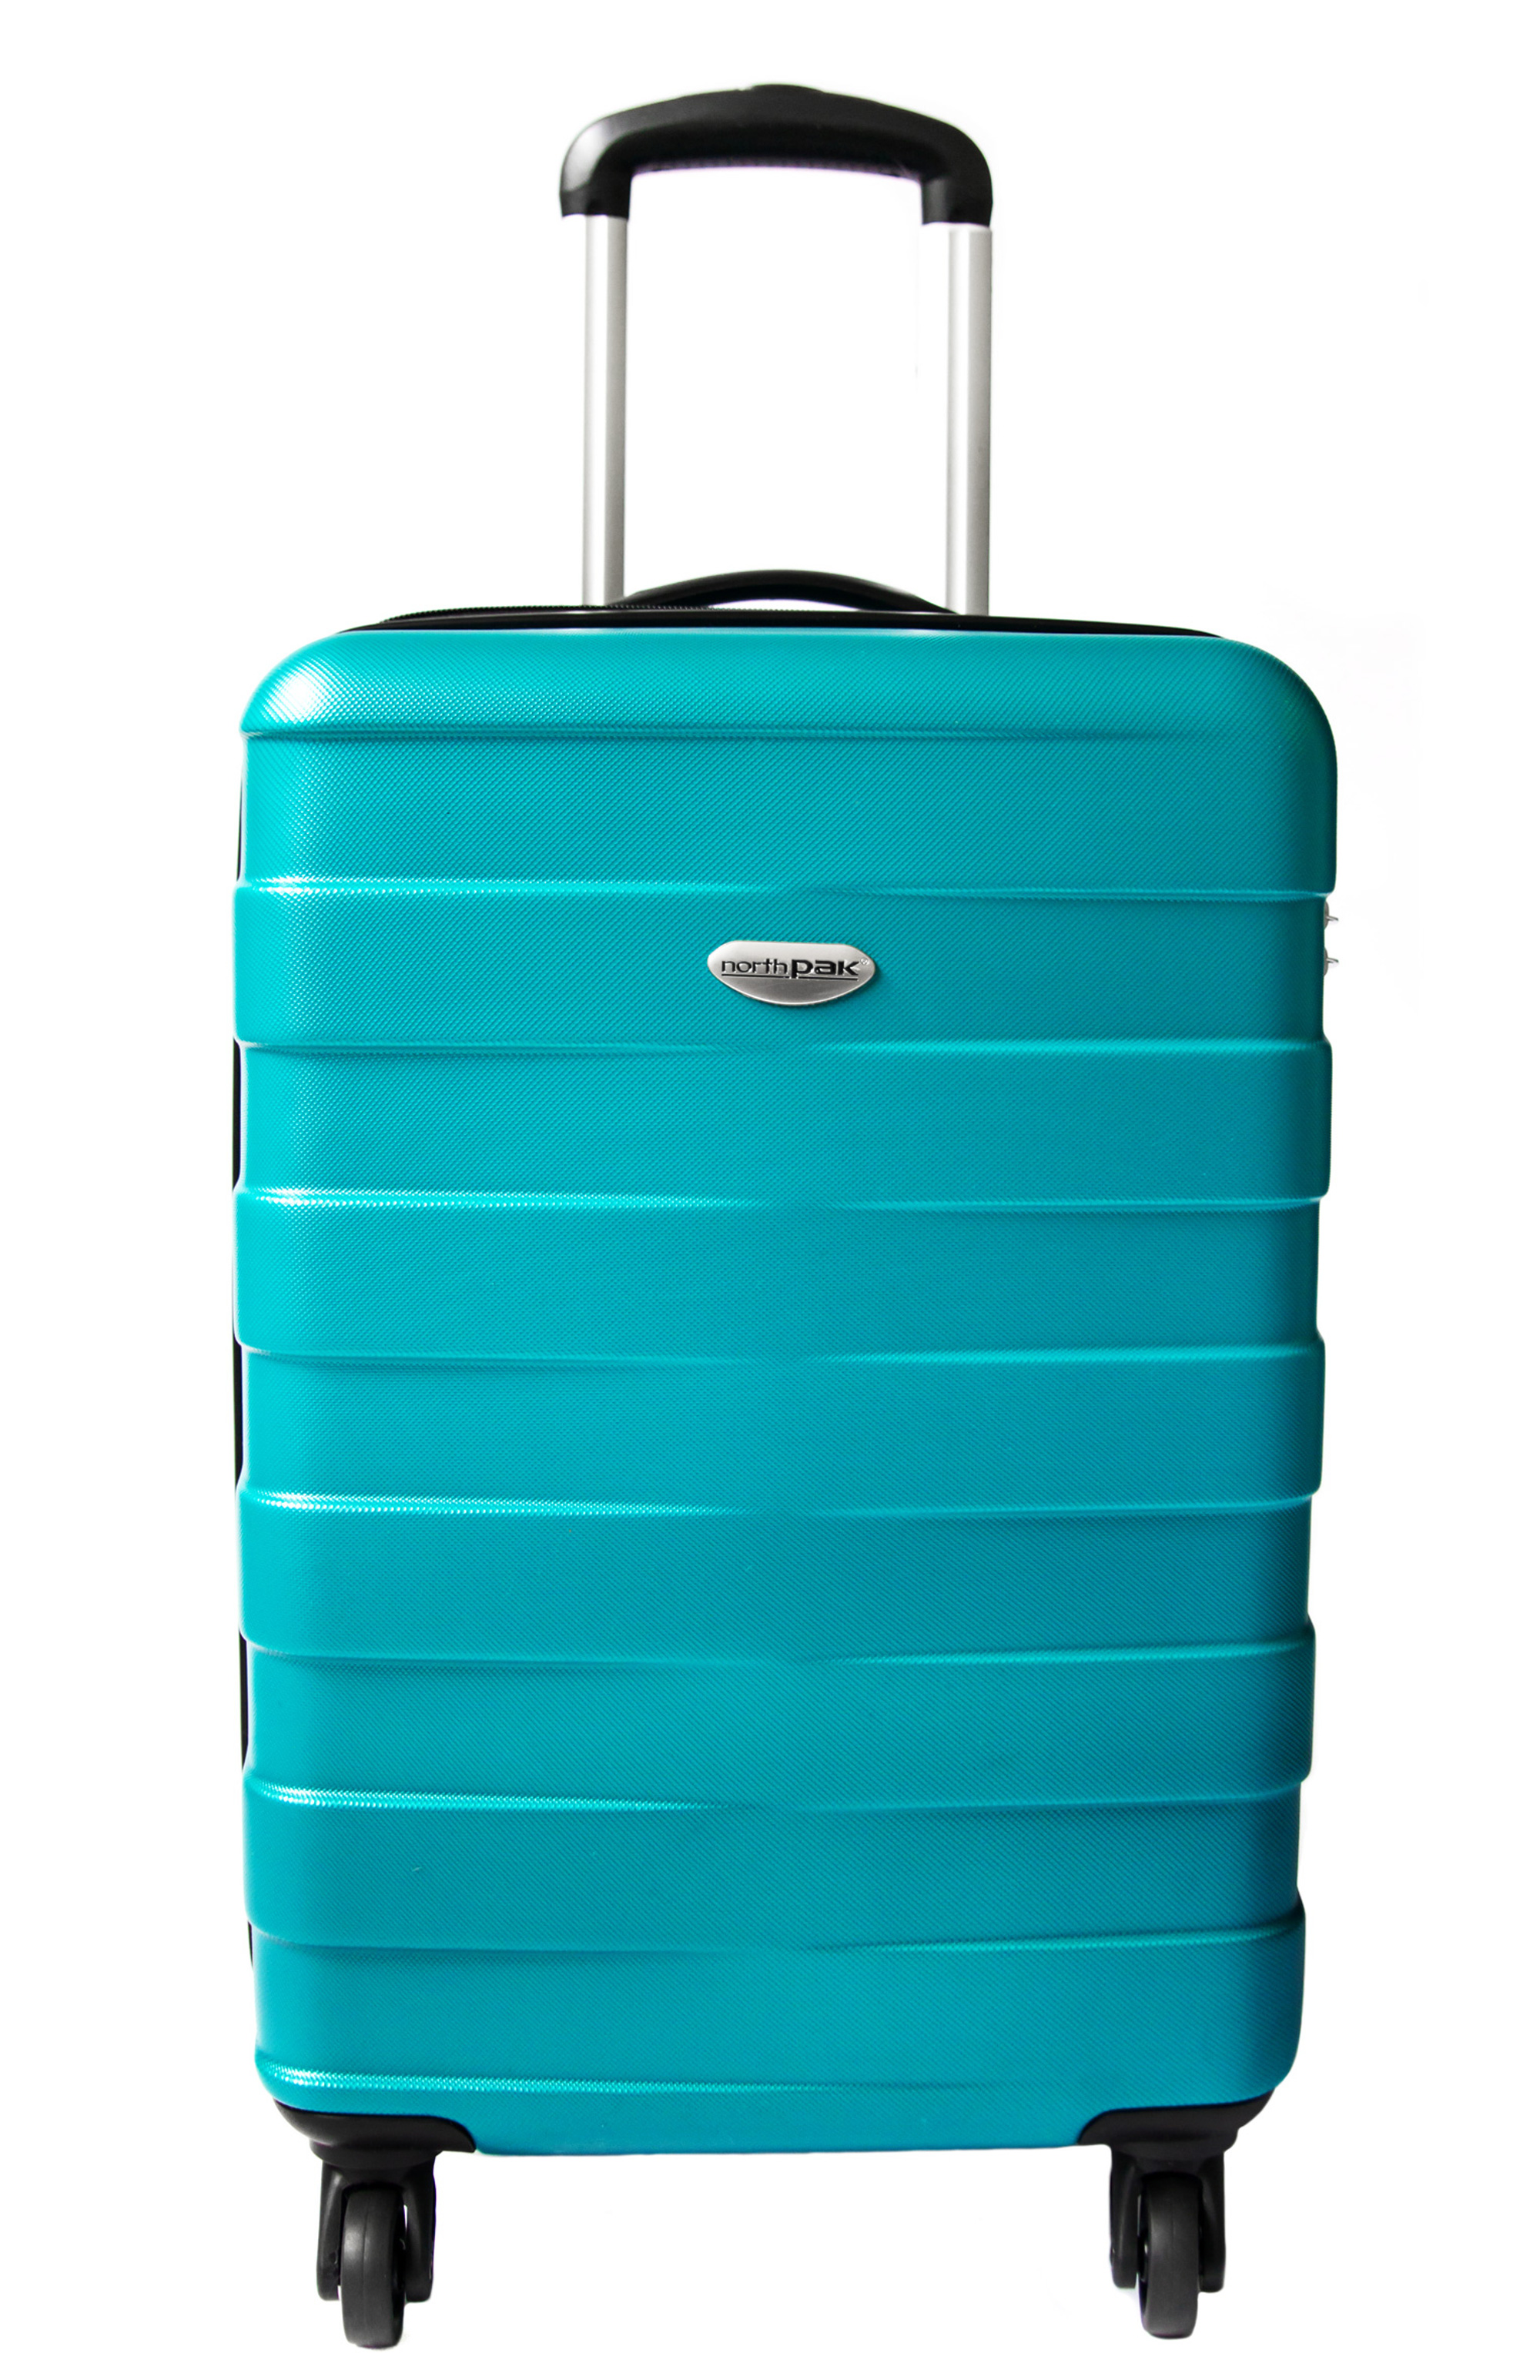 Rsi-1165-t 20 In. Oslo Spinner Luggage - Teal